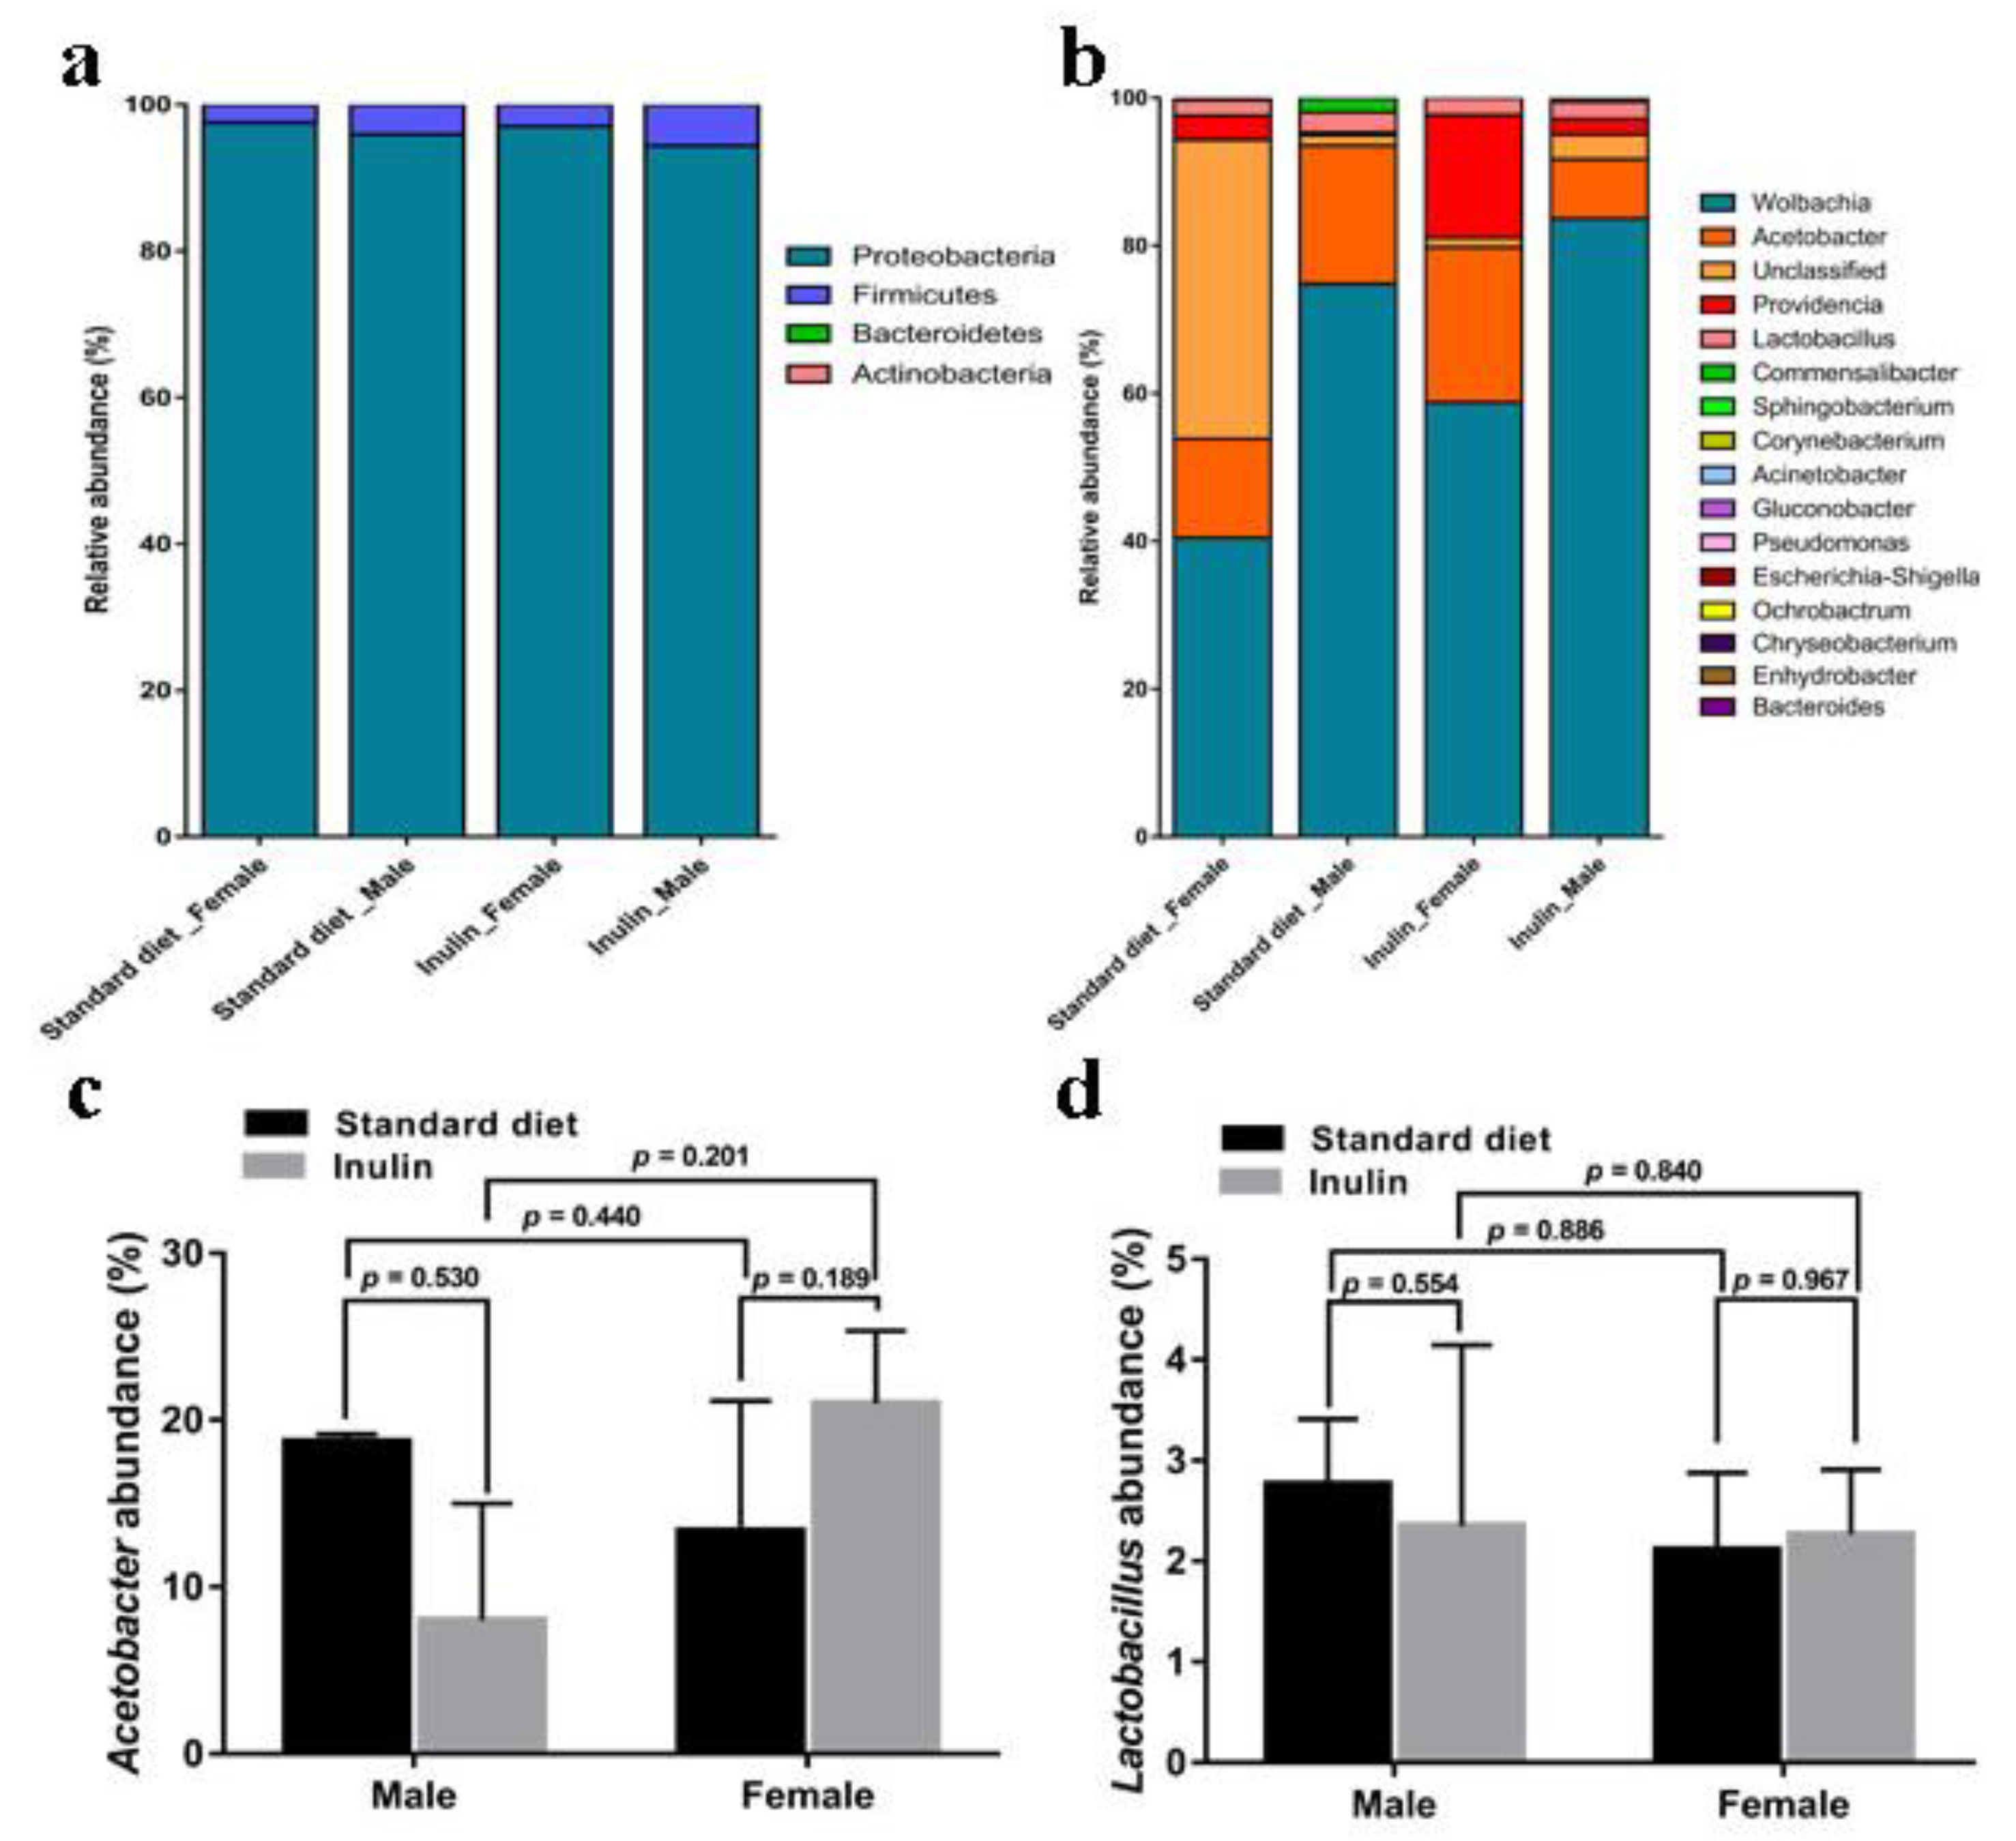 undertrykkeren Pak at lægge Ferie Nutrients | Free Full-Text | The Effect of Inulin on Lifespan, Related Gene  Expression and Gut Microbiota in InRp5545/TM3 Mutant Drosophila  melanogaster: A Preliminary Study | HTML